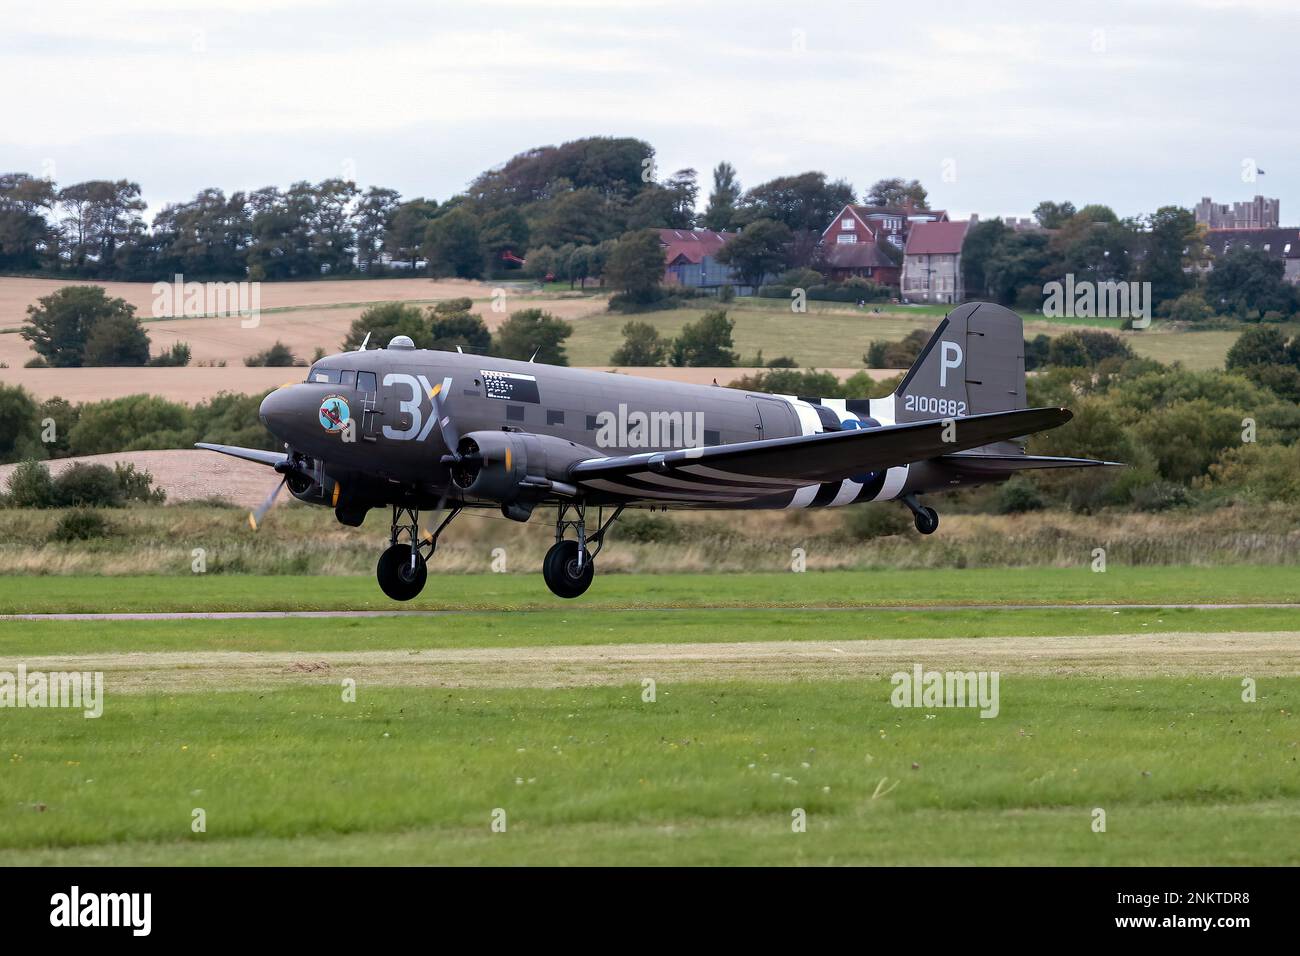 This is the Douglas C-47A Skytrain cargo plane demonstrated at the Shoreham Airshow, Shoreham Airport, East Sussex, UK. 30th August 2014 Stock Photo